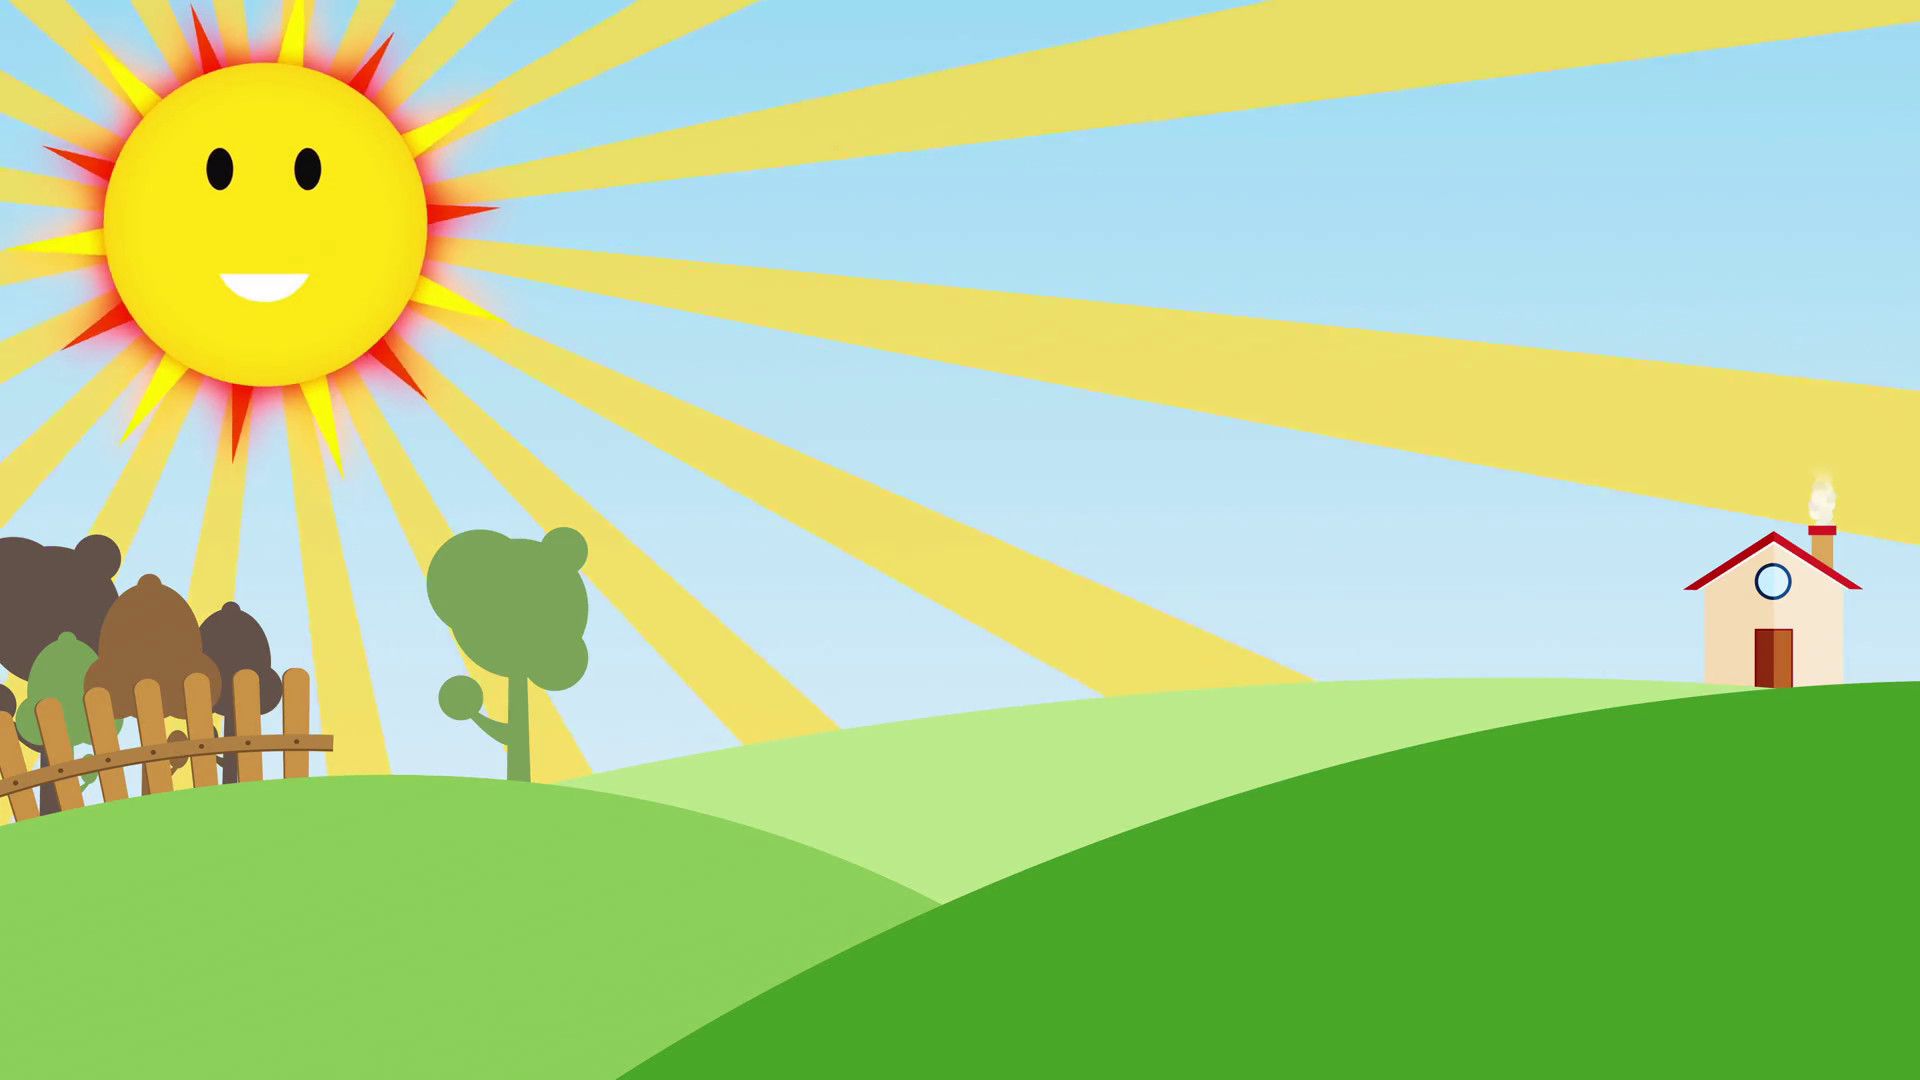 1920x1080 Nature Background For Kids With Smiling Sun seamless loop. Nice cartoon  animation of colorful farm